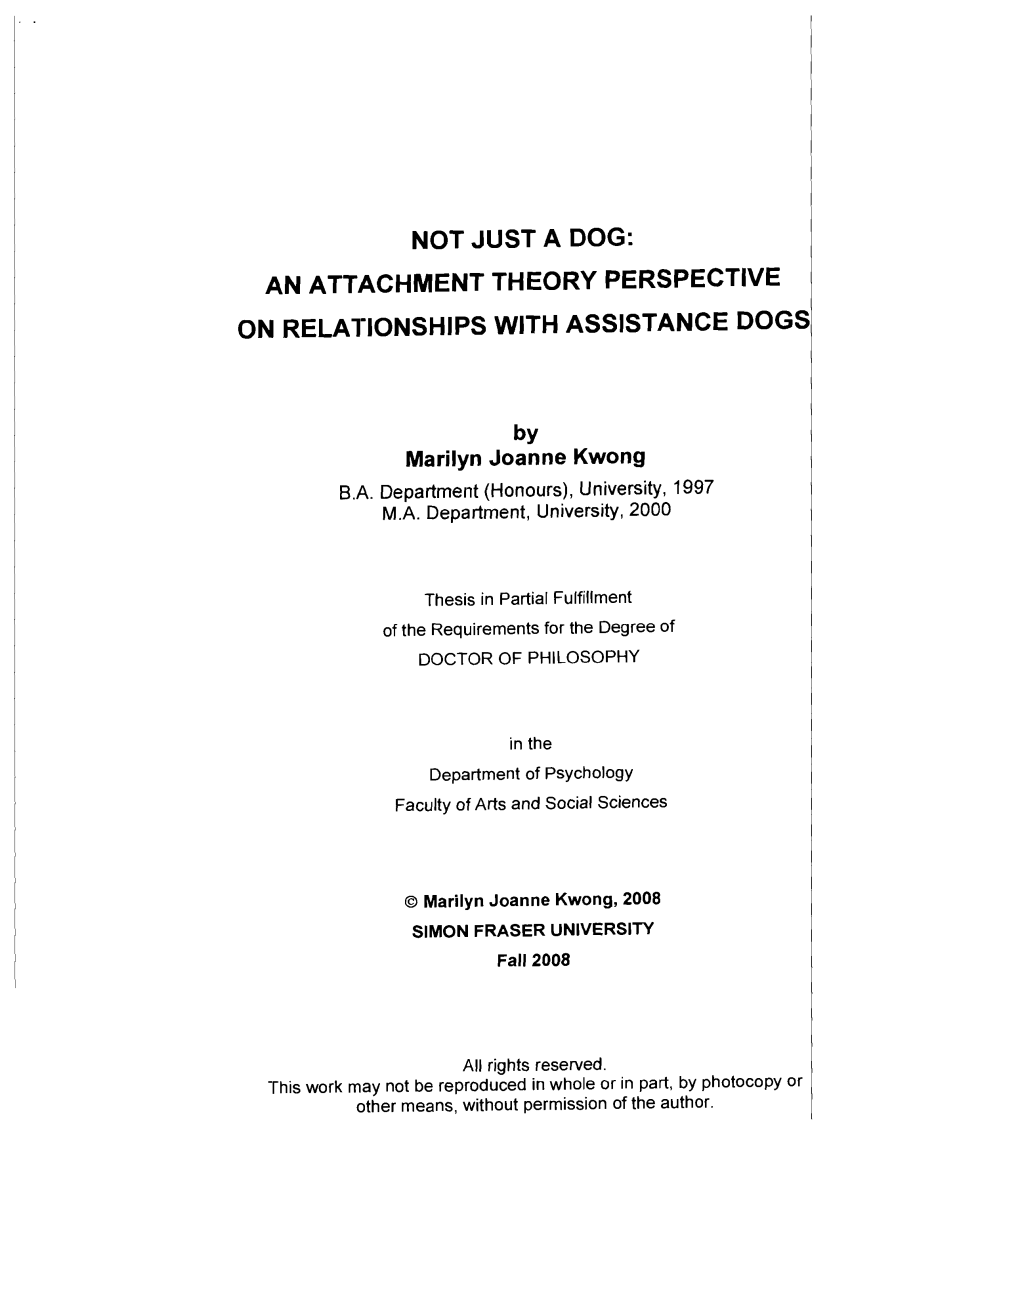 Not Just a Dog: an Attachment Theory Perspective on Relationships with Assistance Dogs